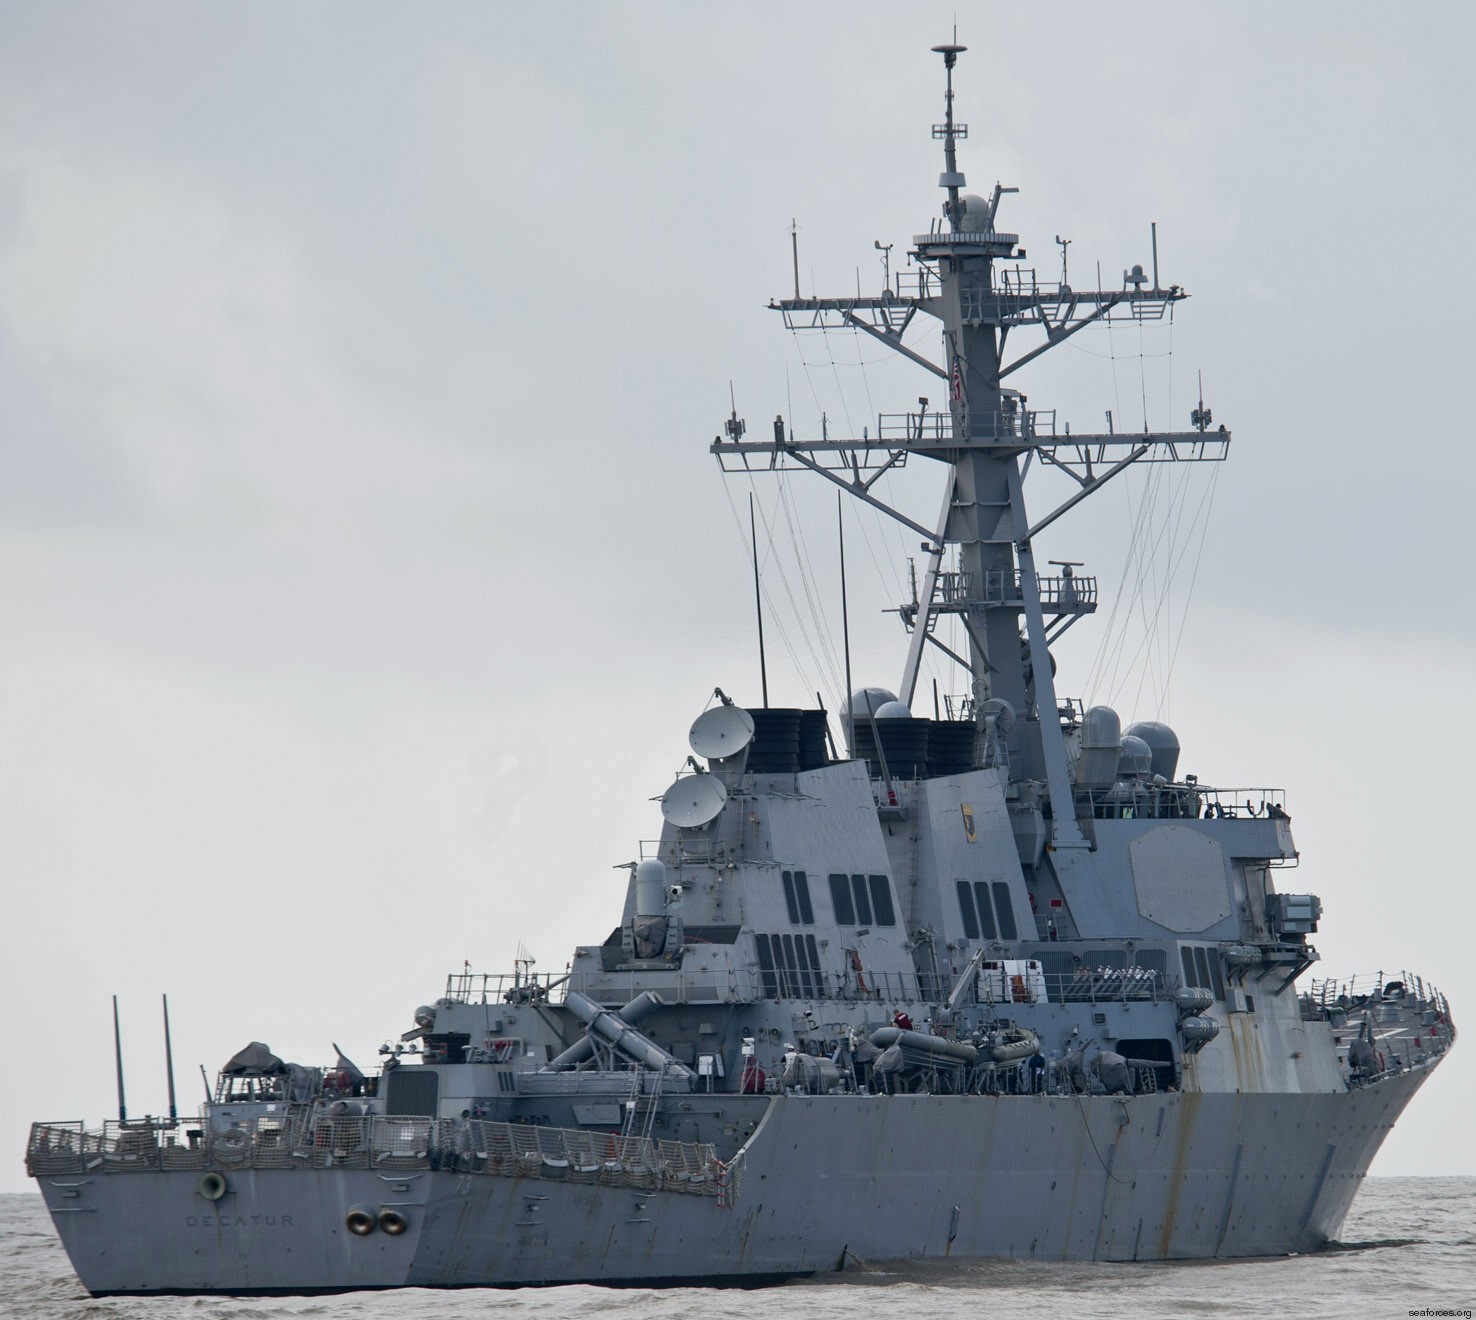 ddg-73 uss decatur guided missile destroyer arleigh burke class aegis bmd 25